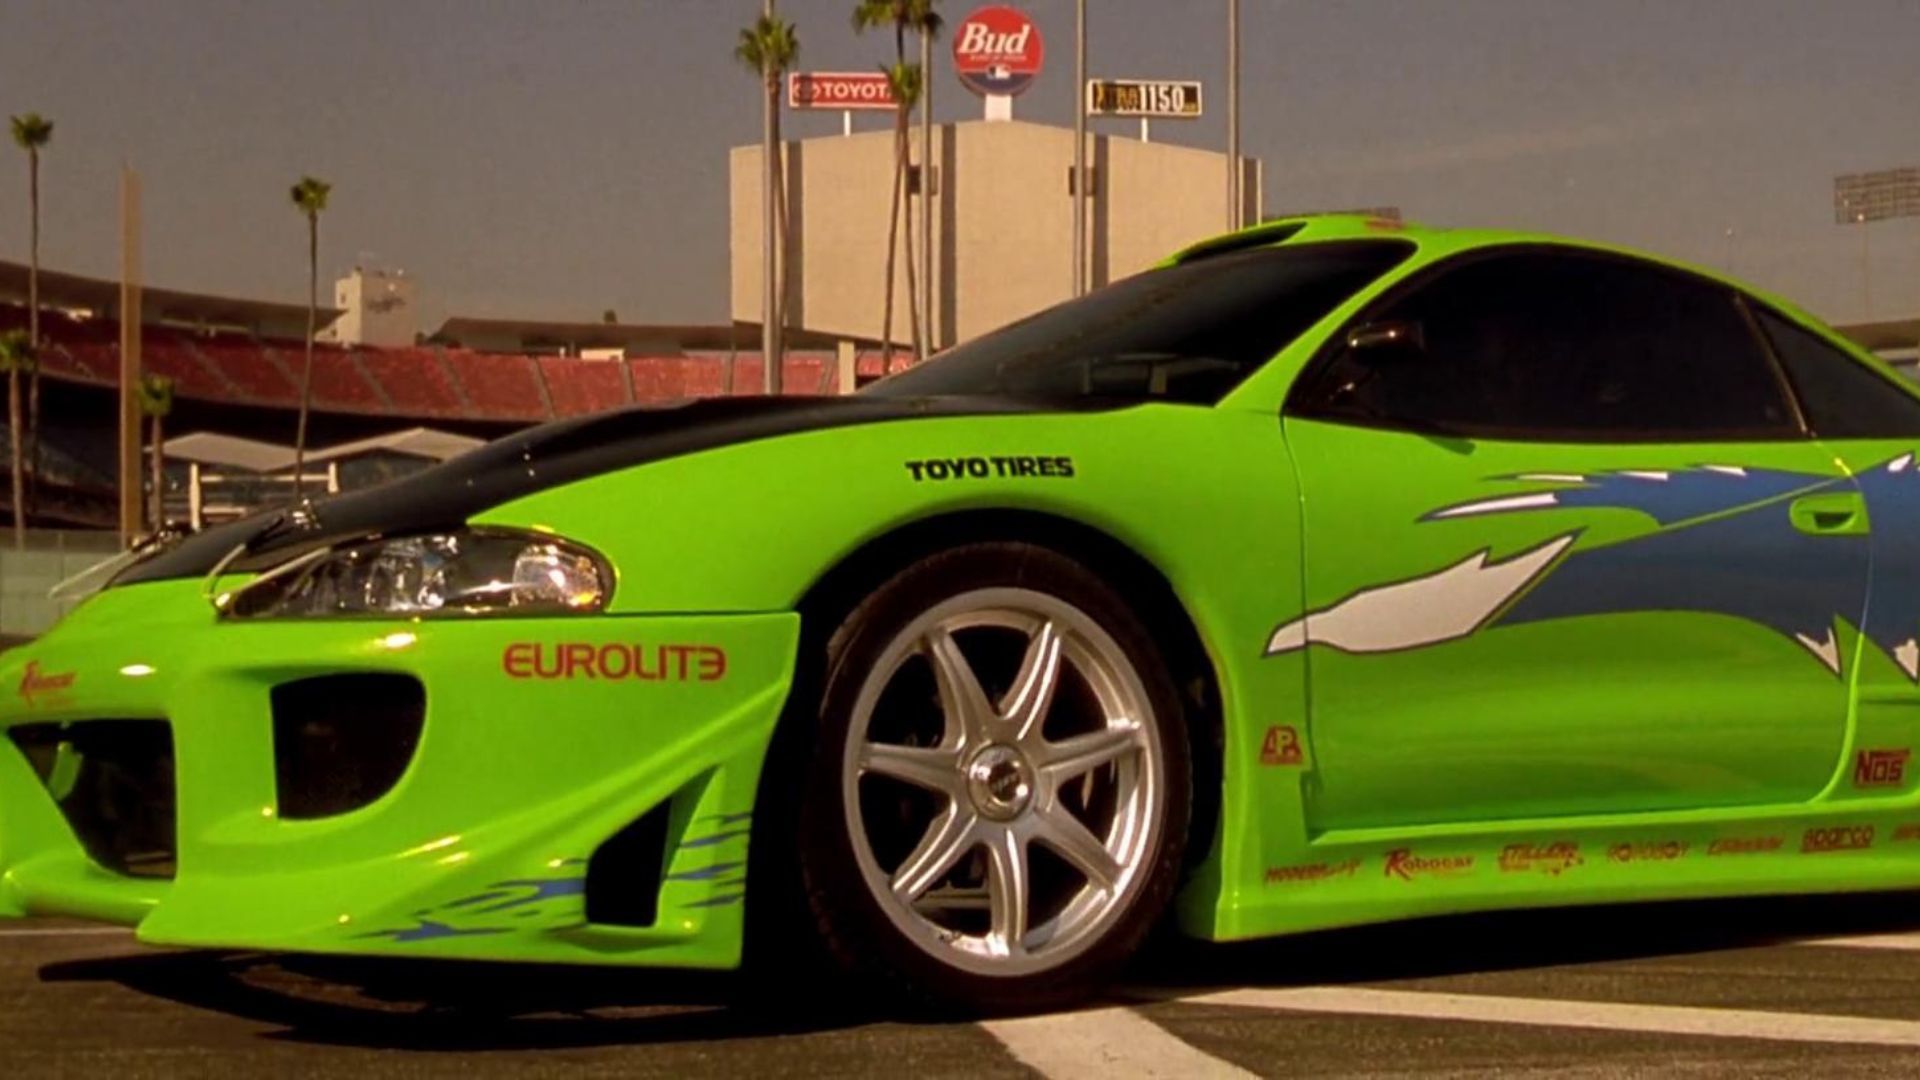 The Best Cars in the Fast & the Furious Franchise